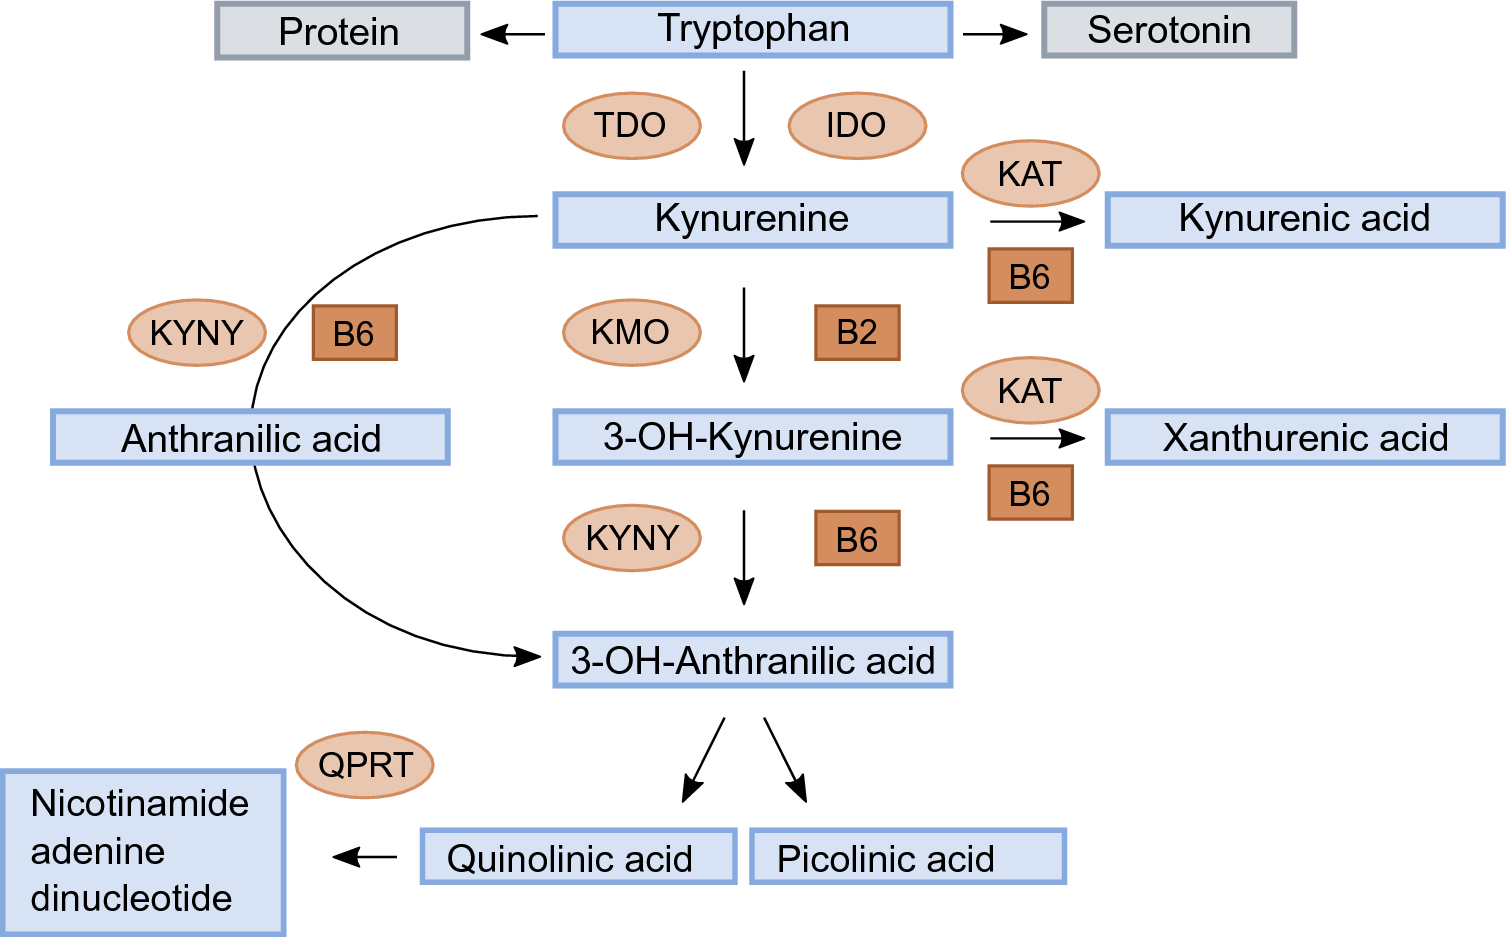 Lower levels of the neuroprotective tryptophan metabolite, kynurenic acid,  in users of estrogen contraceptives | Scientific Reports